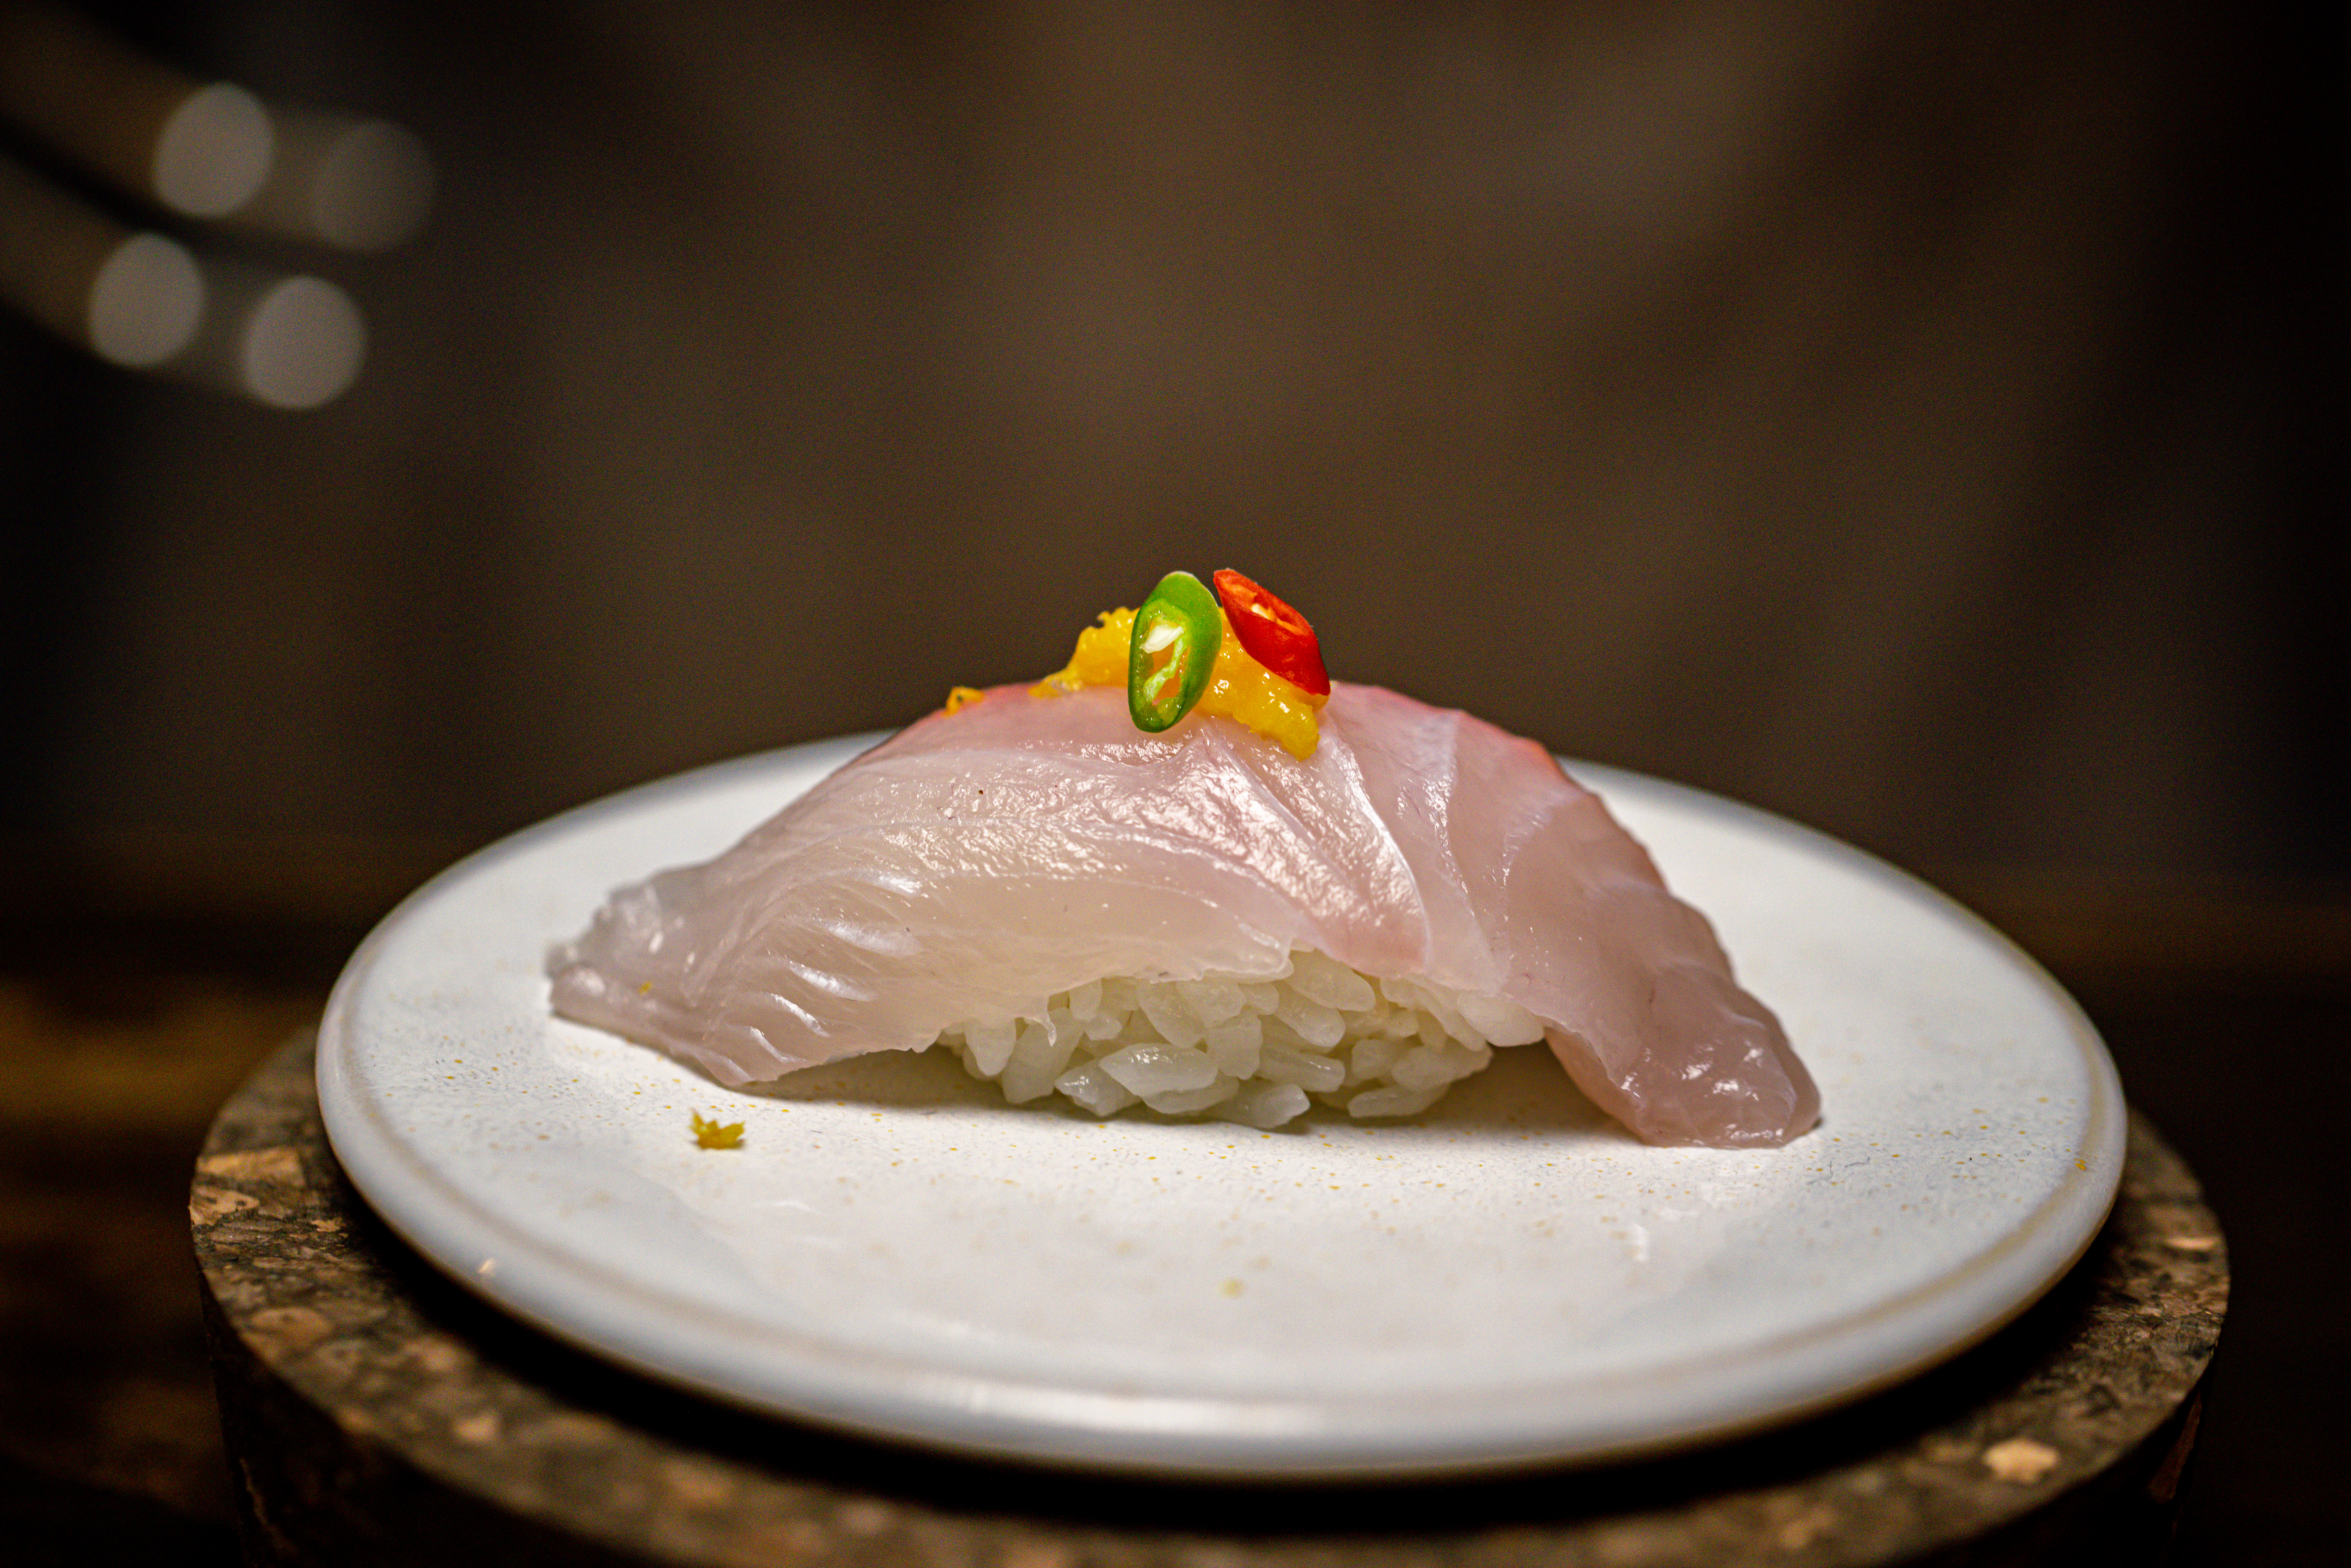 A piece of sushi with a pale pink fish with sliced green and red chiles on a mound of white rice on a round white plate.